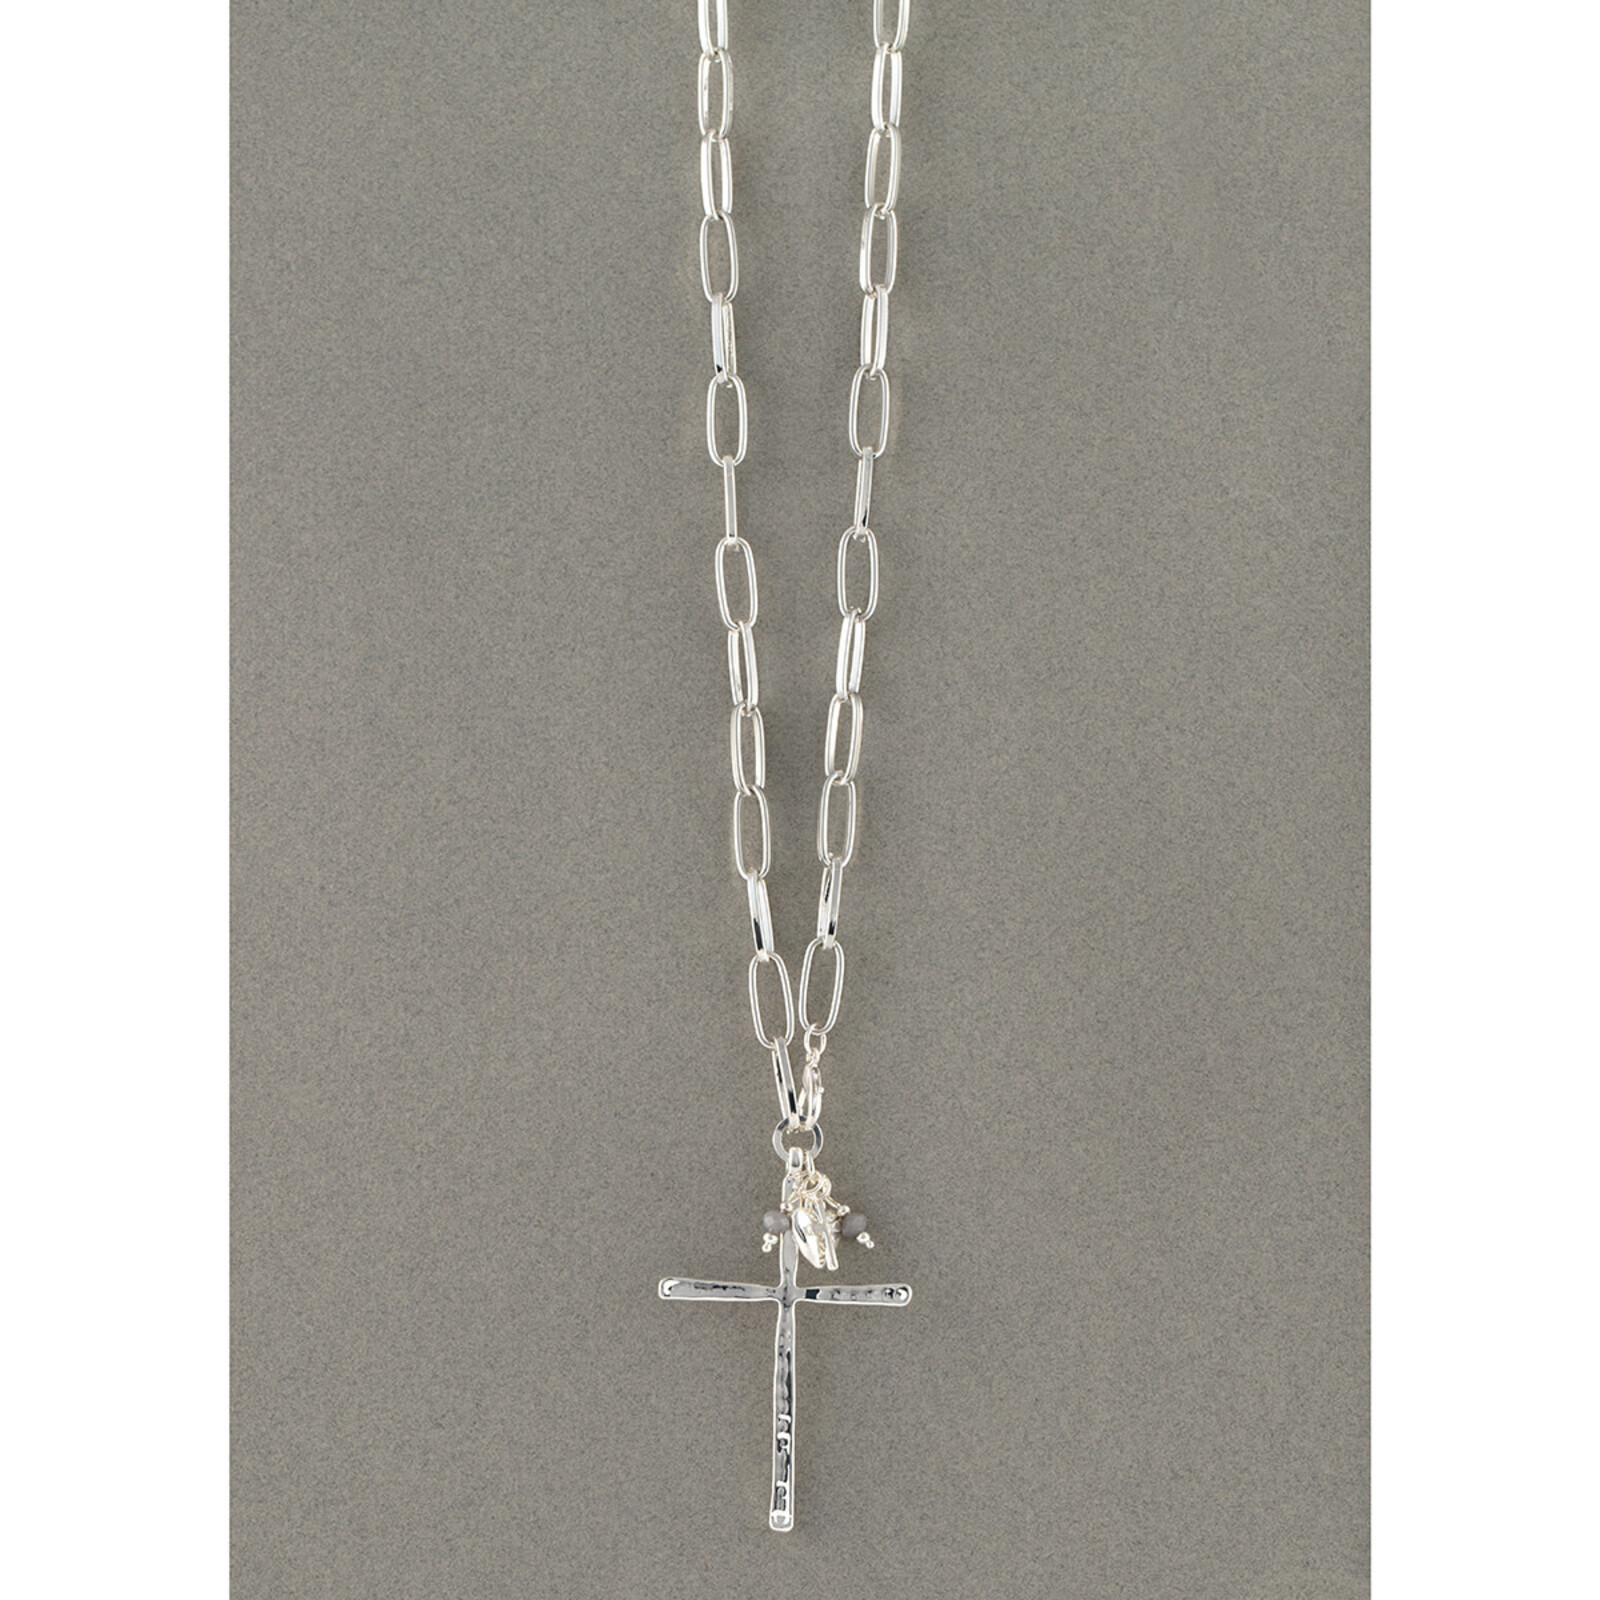 Meravic NECKLACE CROSS LINKS HEART SILVER    C3322 loading=